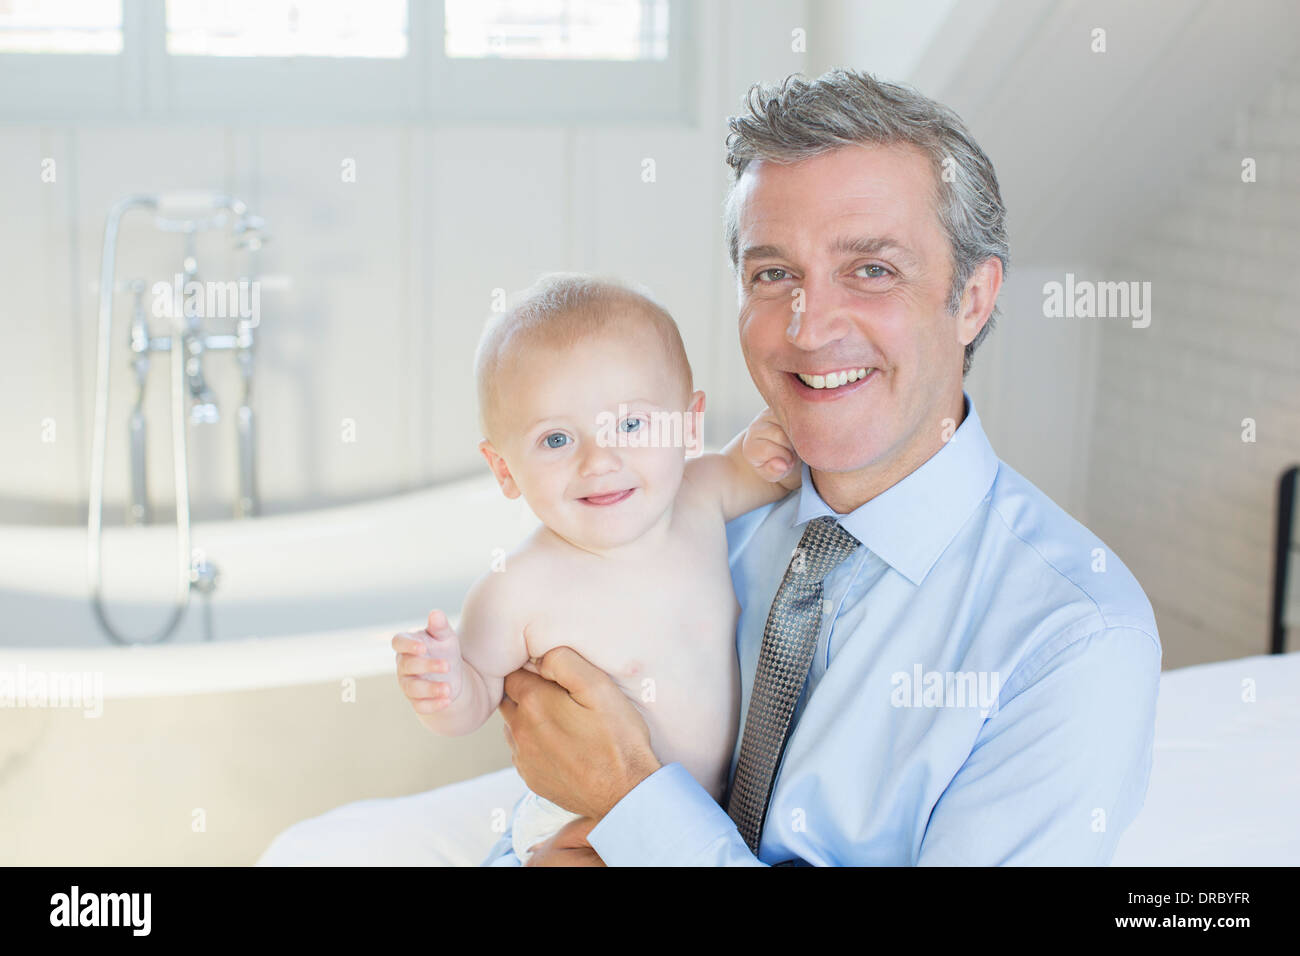 Father holding baby in bathroom Stock Photo